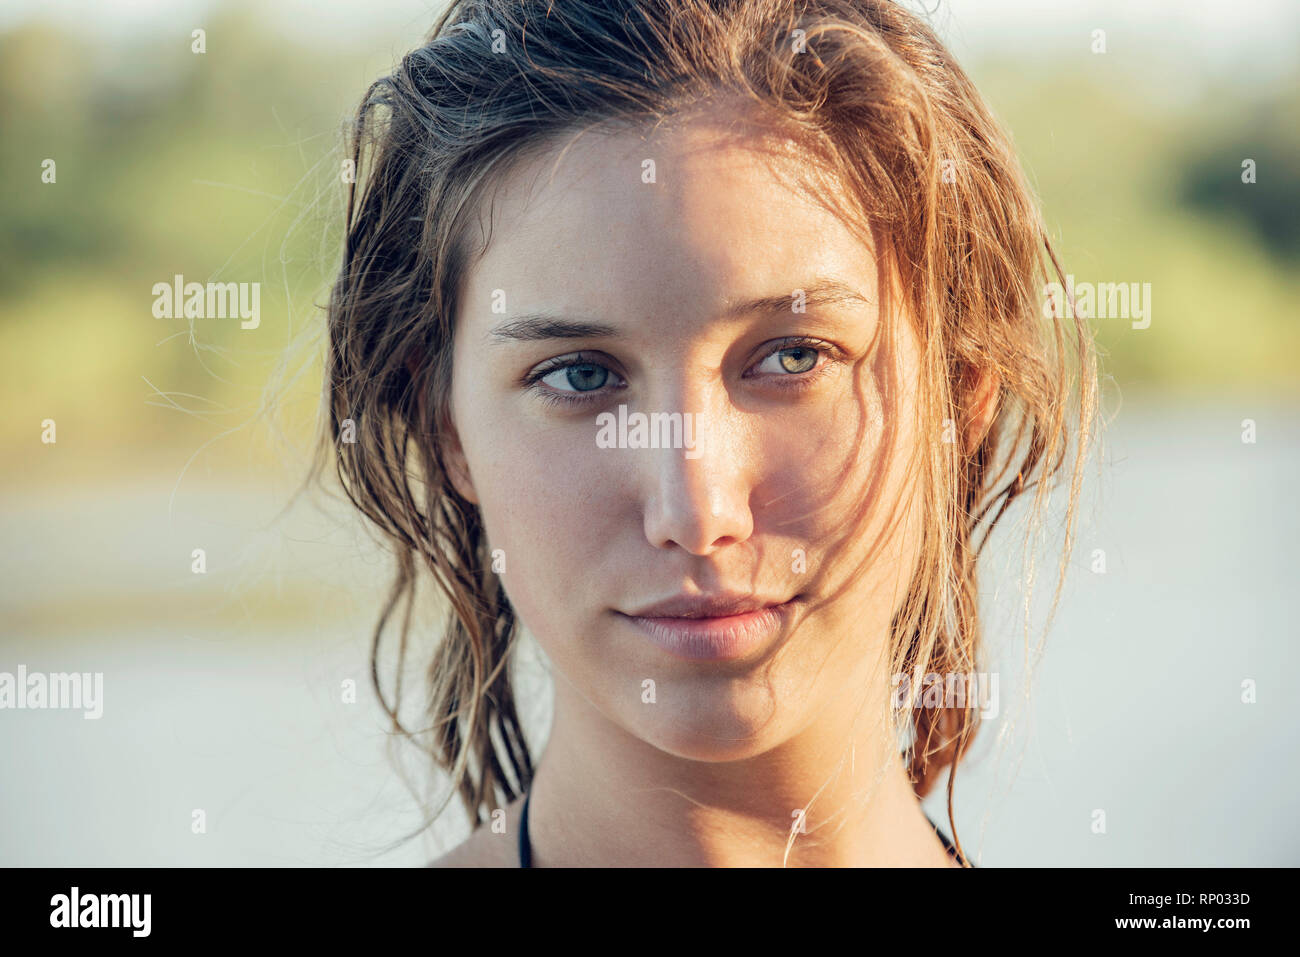 Close-up of young woman standing outdoors Stock Photo